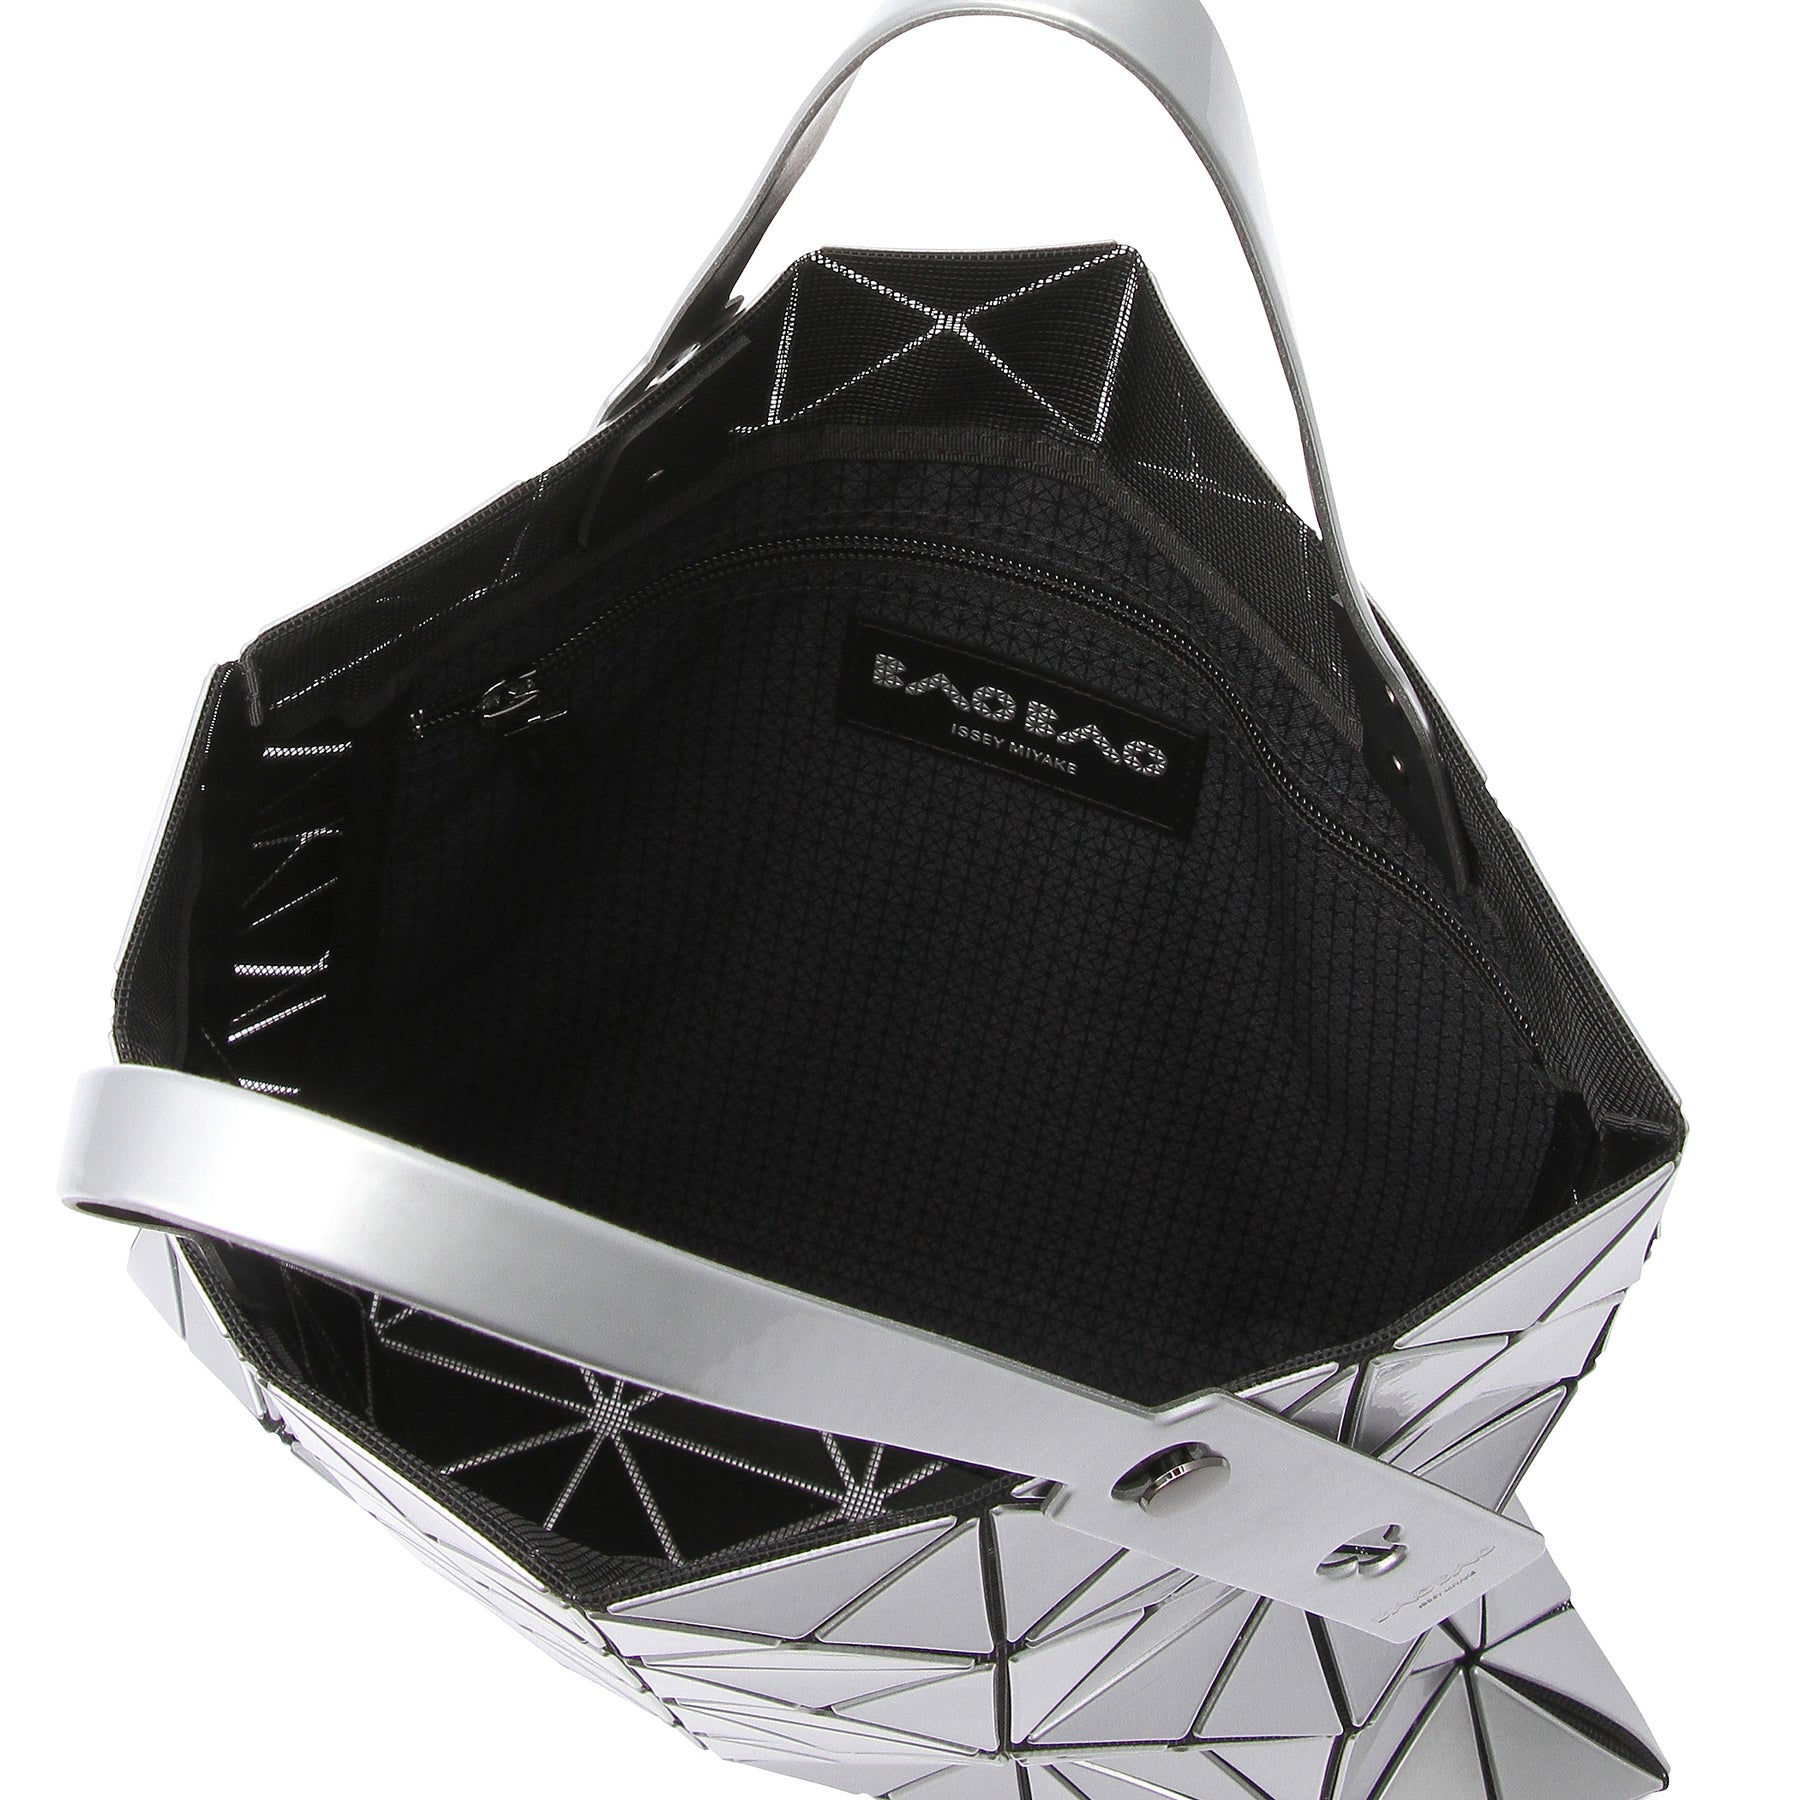 LUCENT TOTE BAG, The official ISSEY MIYAKE ONLINE STORE